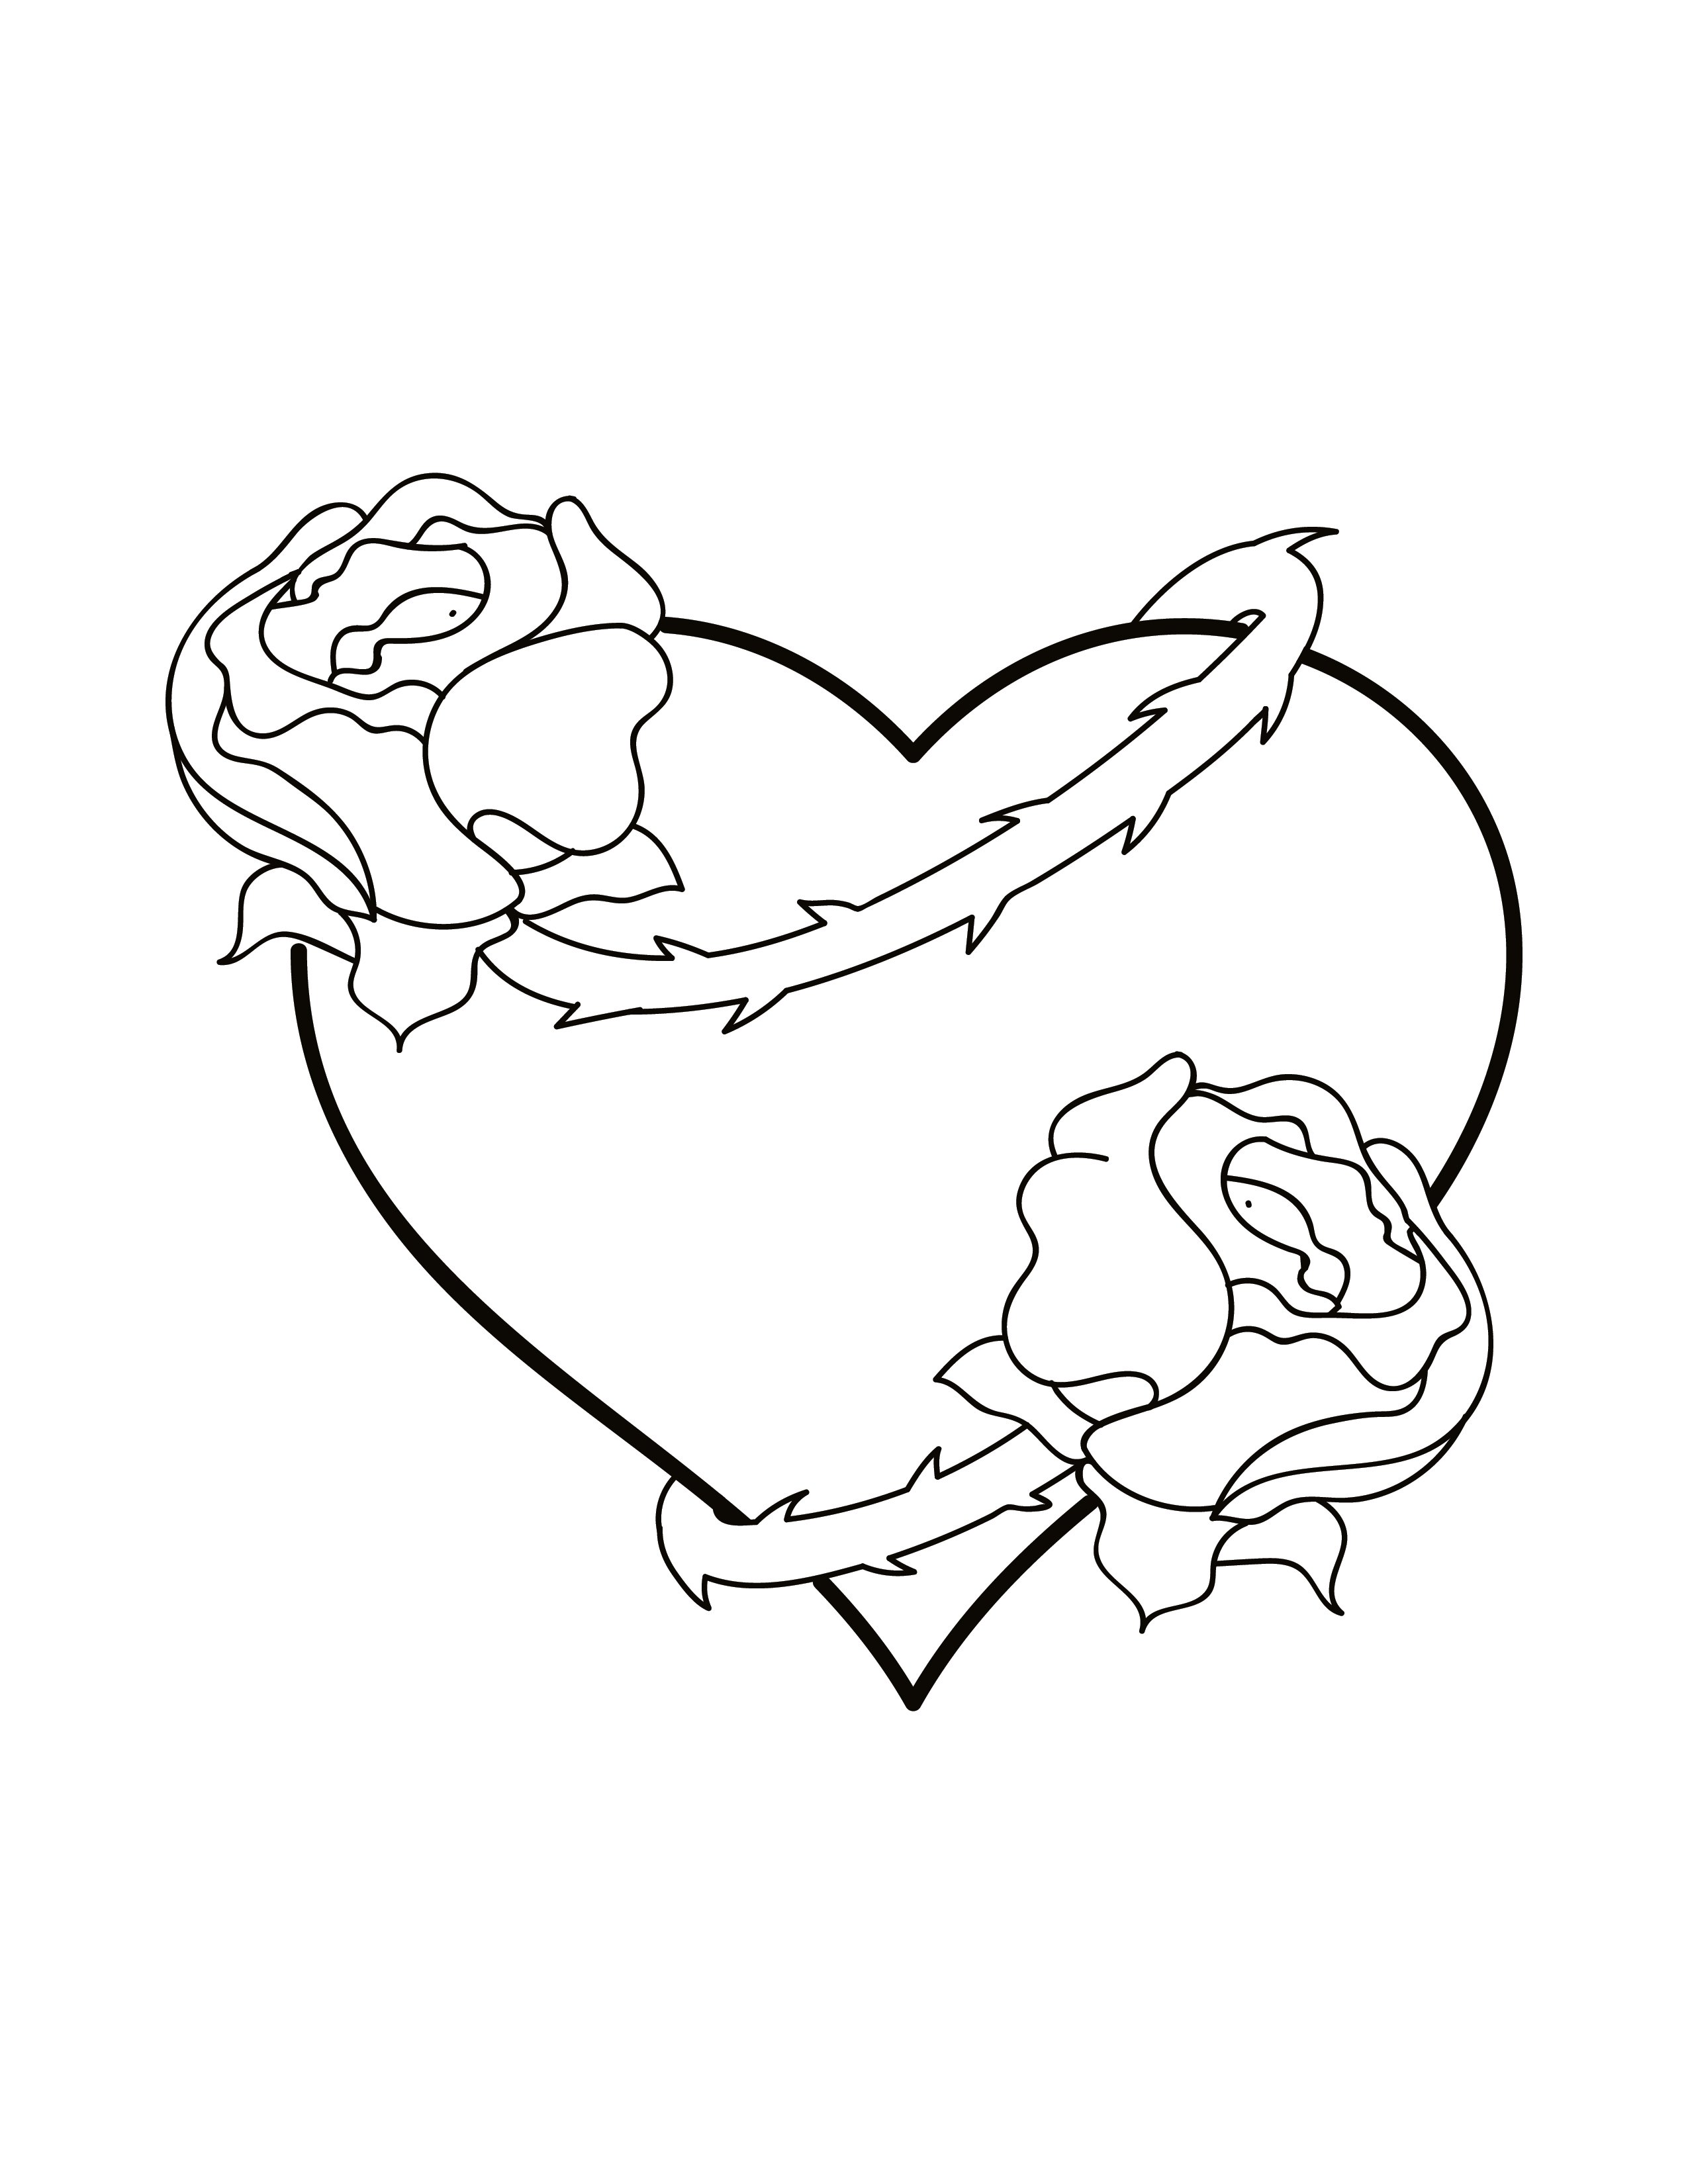 Free Heart Coloring Pages Templates, 50+ Download | Template.net